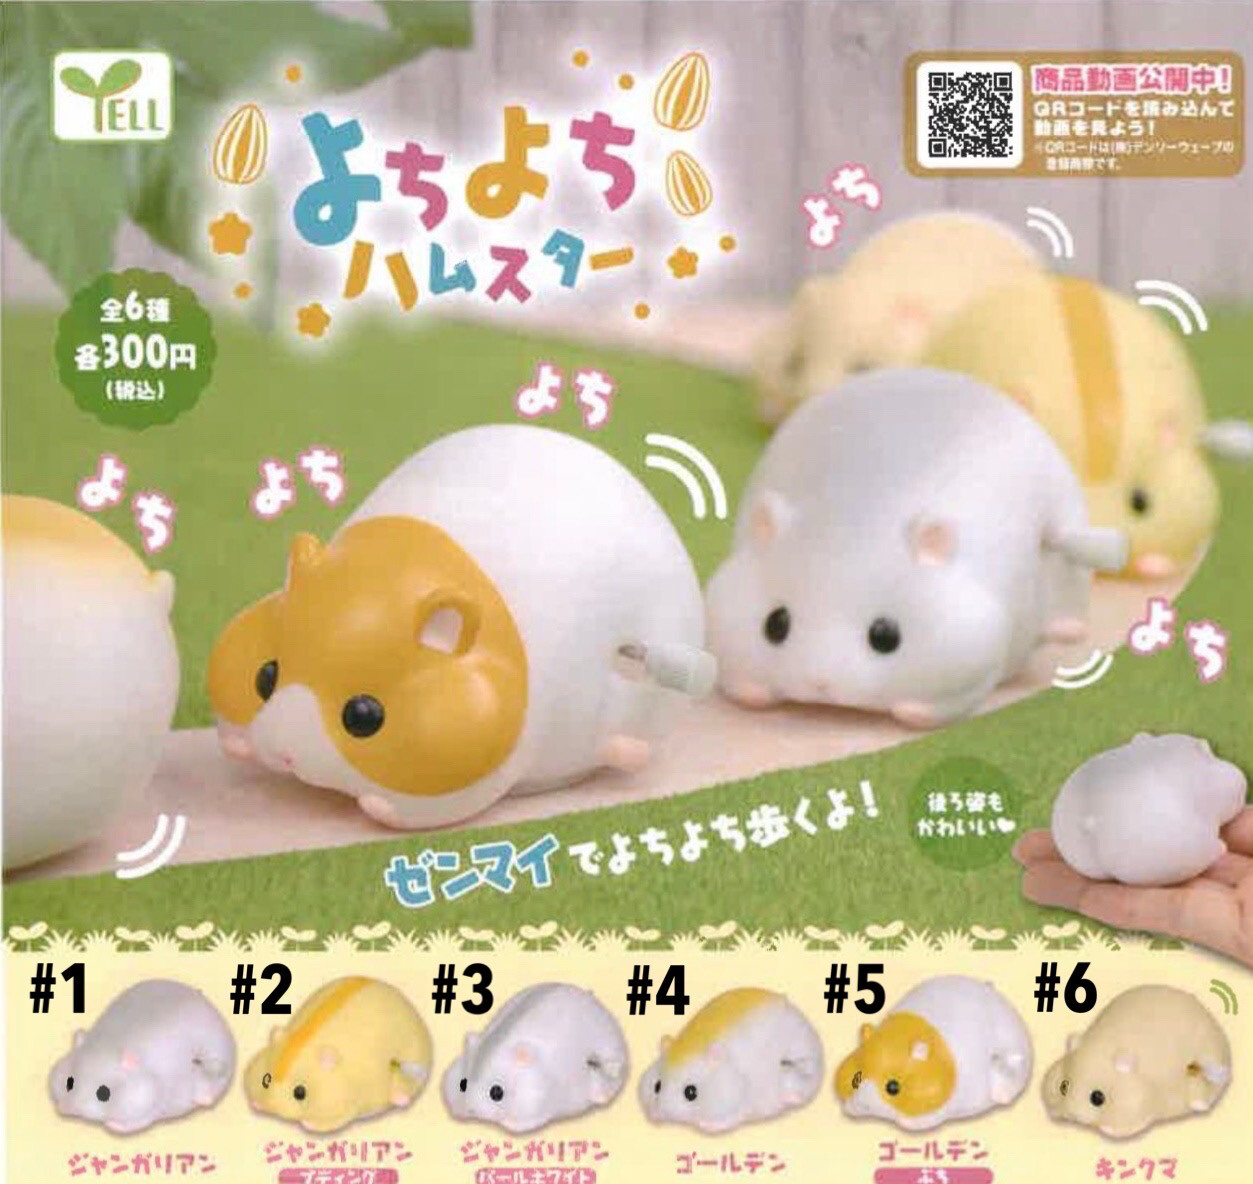 Yell Chubby Hamster Wind-up Walking Toy Gashapon